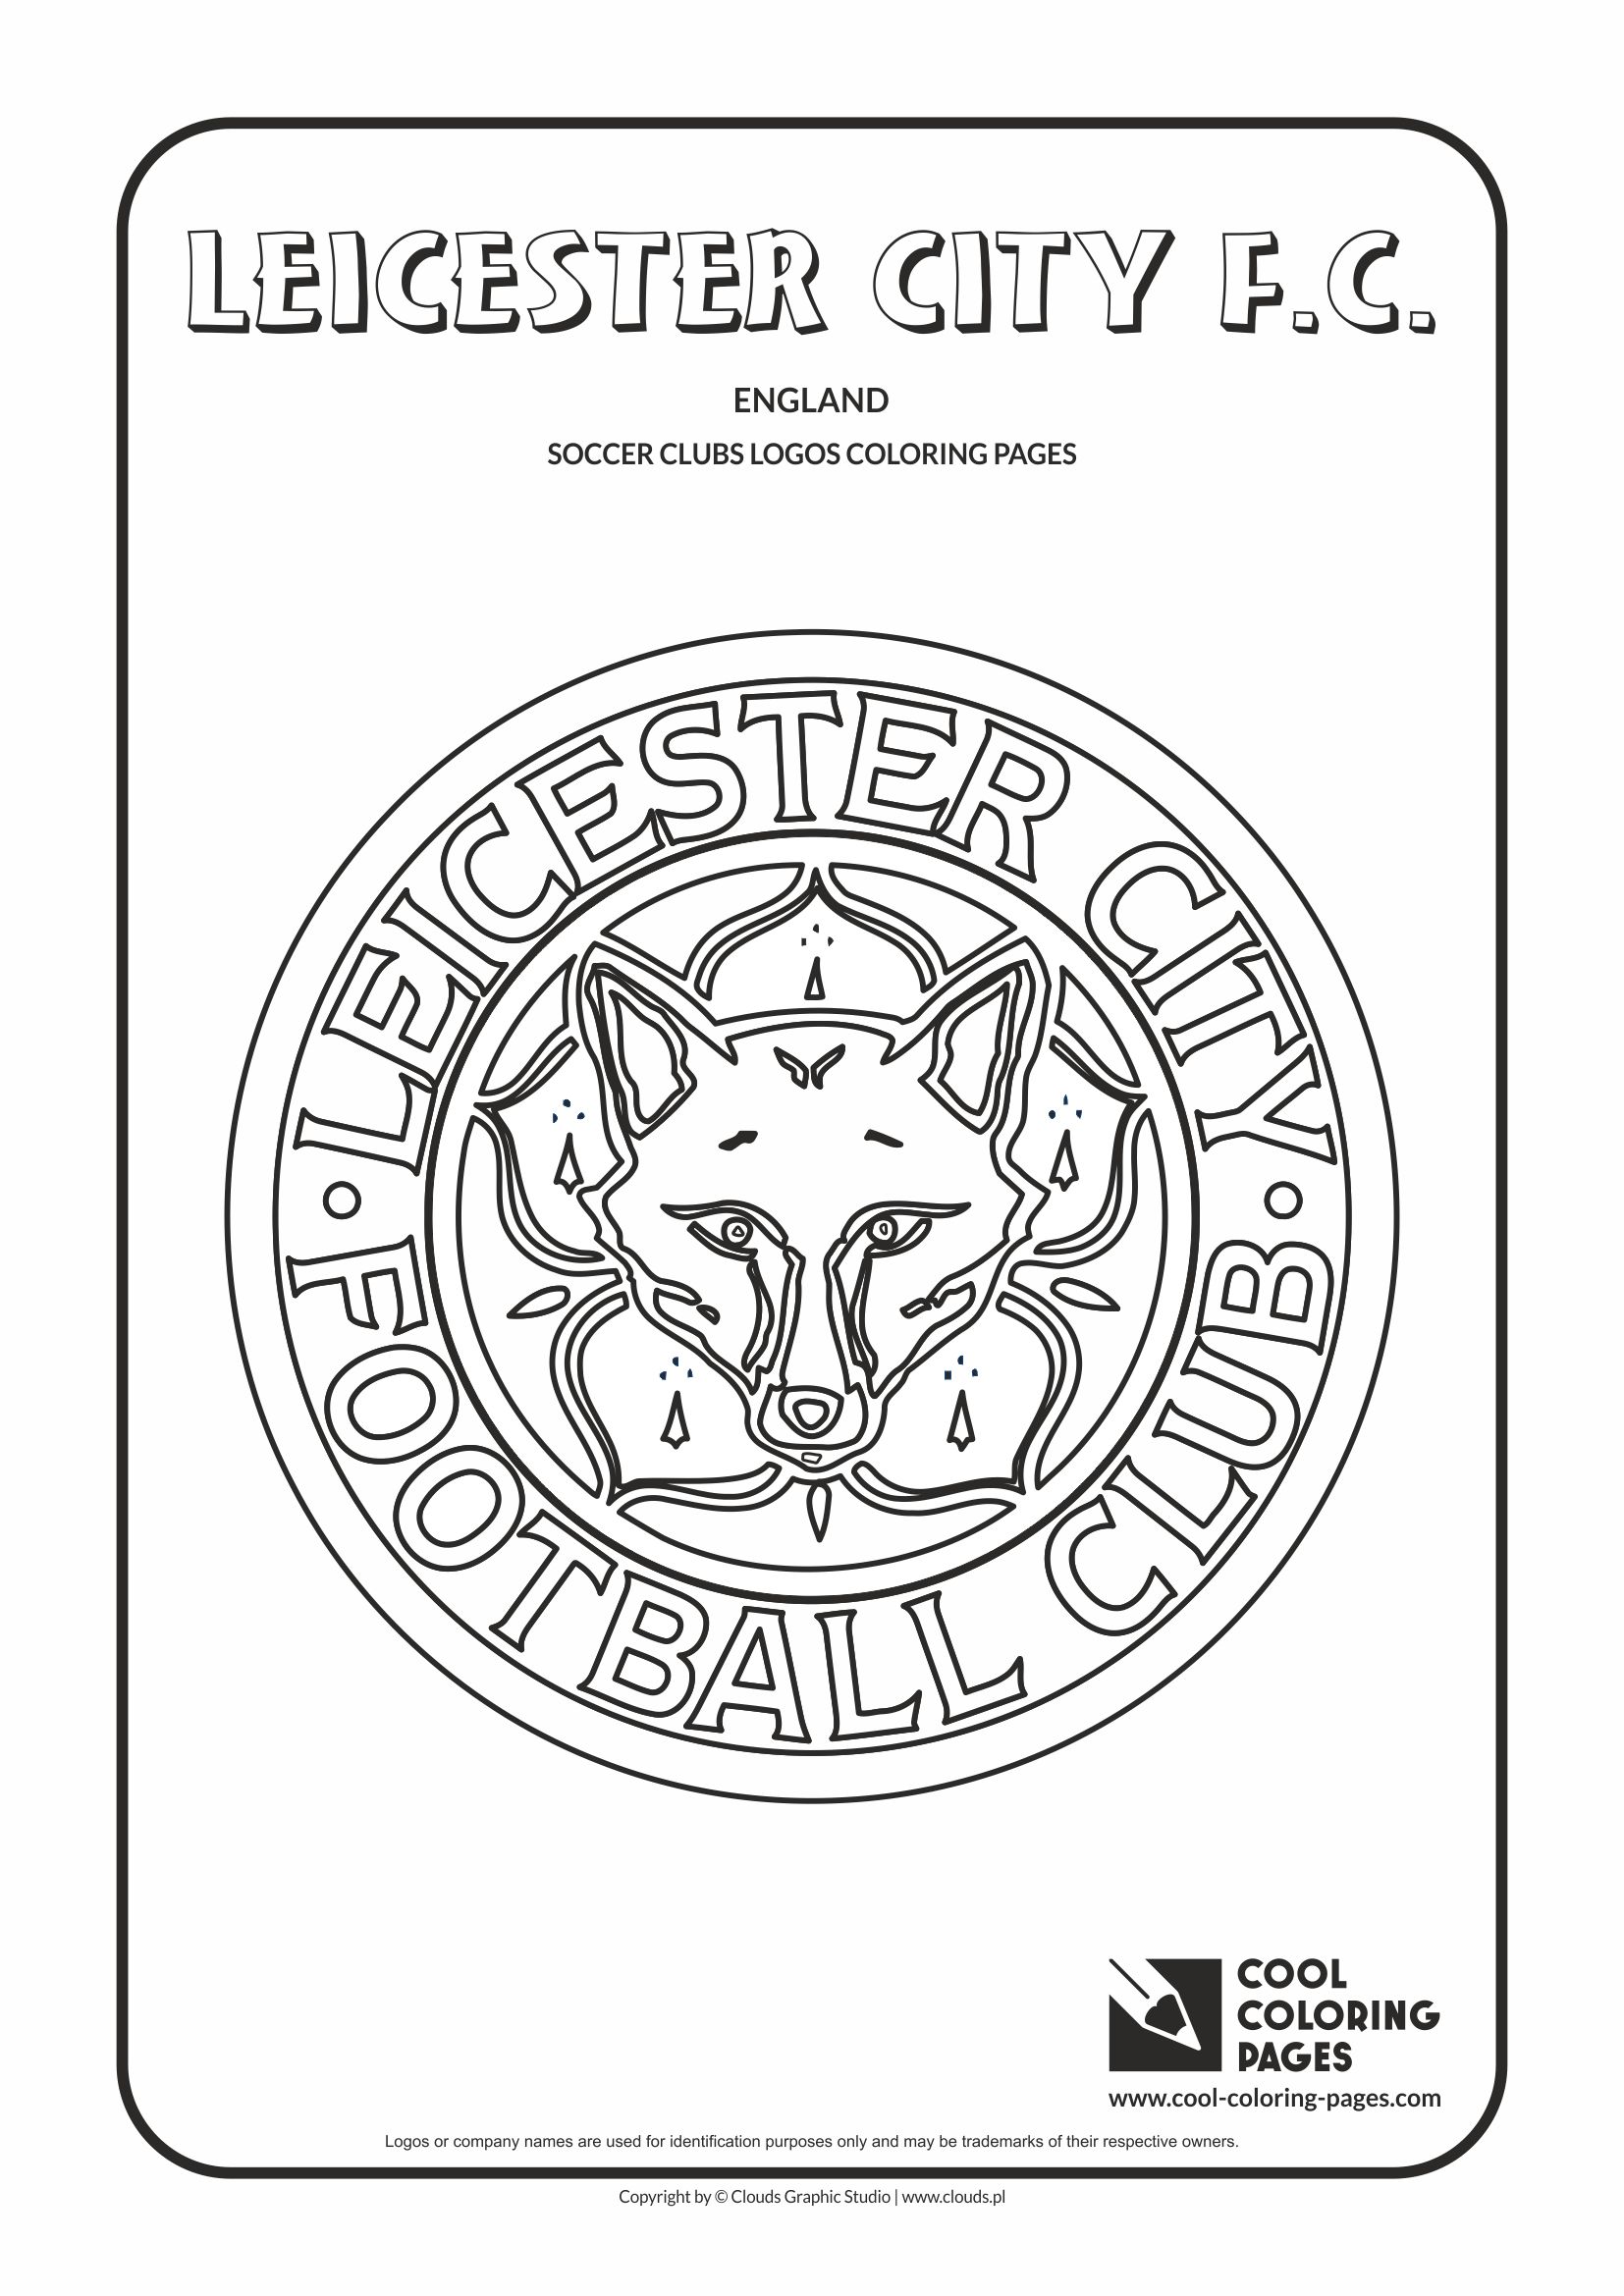 Leicester City F.C. logo coloring / Coloring page with Leicester City F.C. logo / Leicester City F.C. logo colouring page.